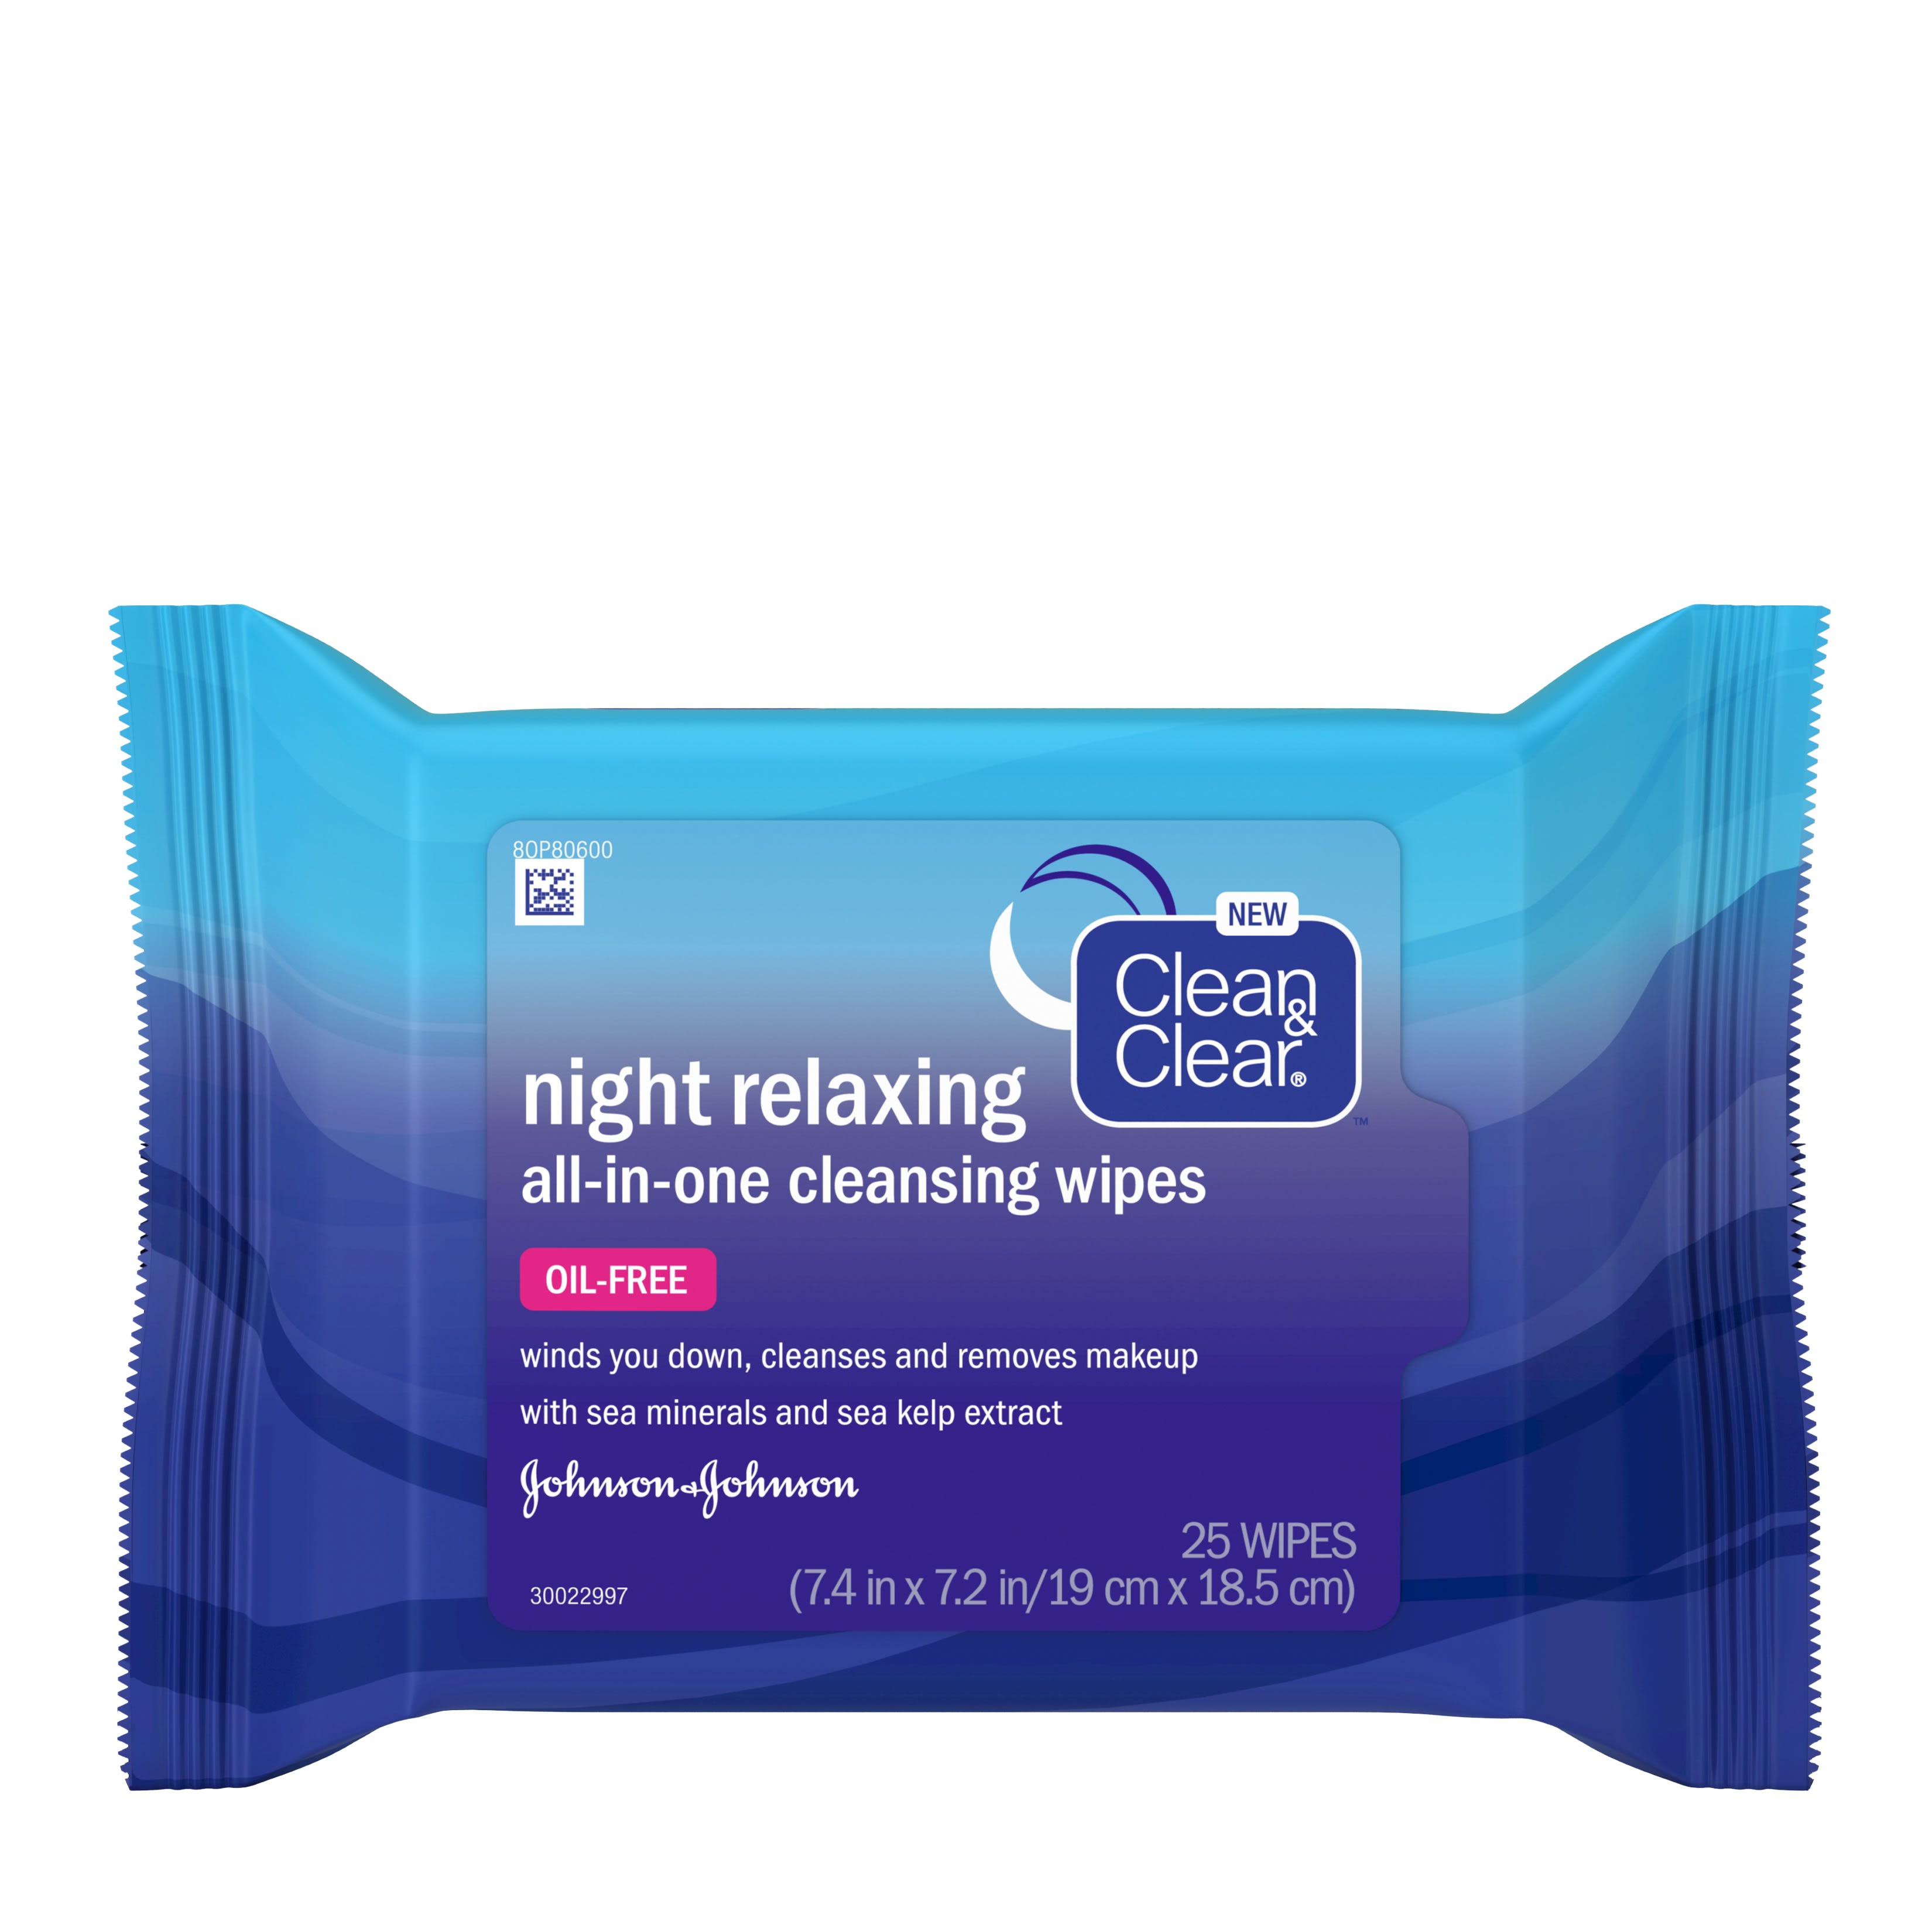 Clean & Clear Night Relaxing All-In-One Facial Cleansing Wipes, 25 ct - image 1 of 16